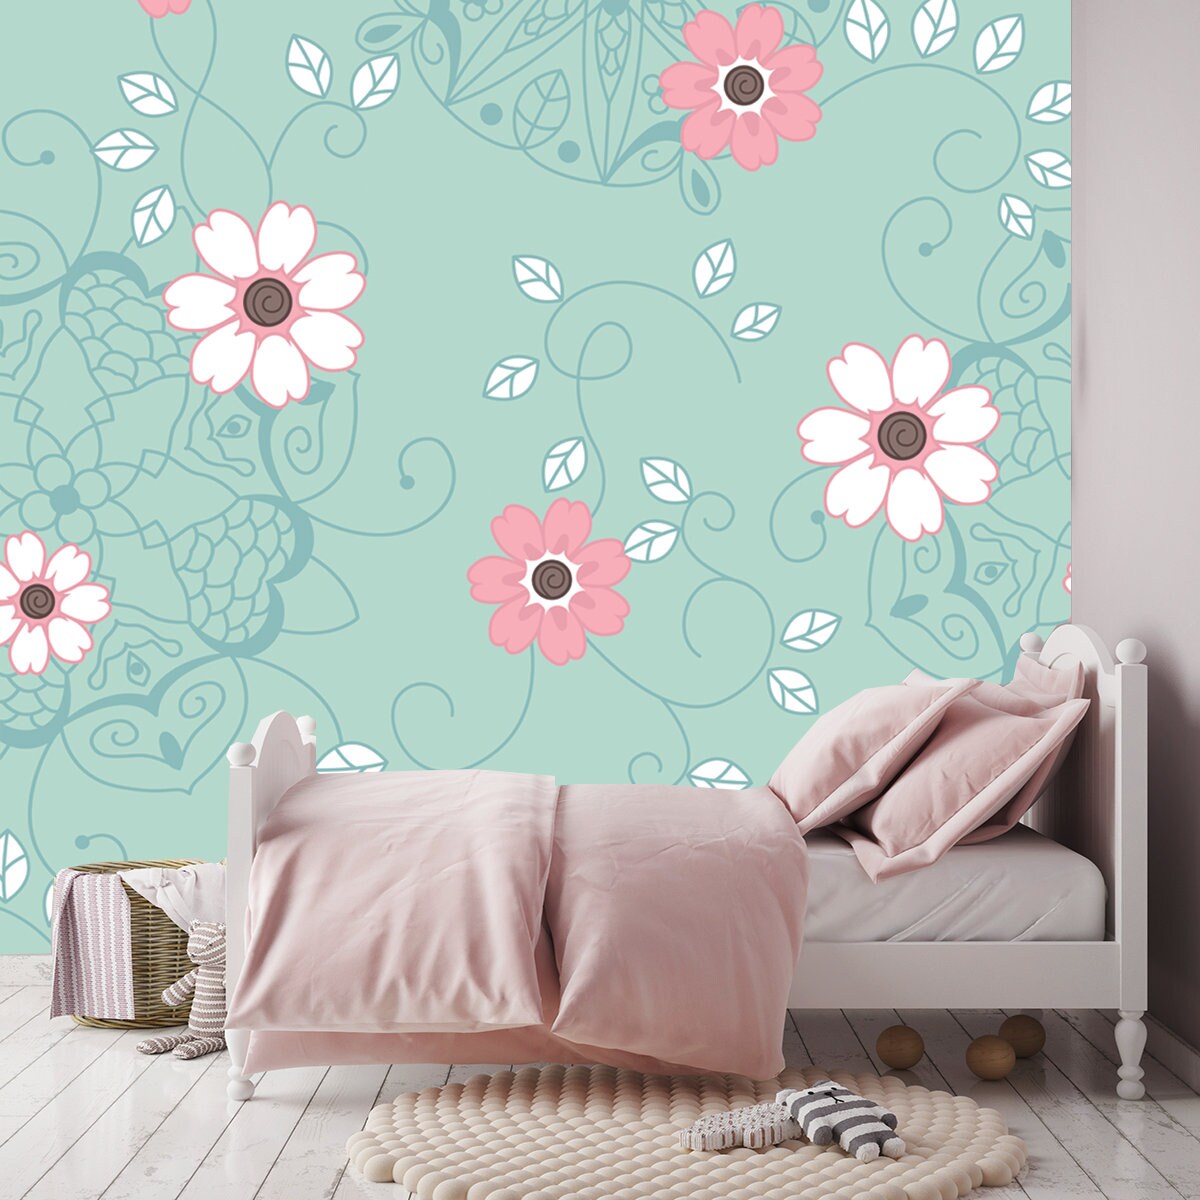 Pink and White Flowers and Little White Leaves and Vines with Beautiful Mandalas on a Turquoise Background Wallpaper Girls Bedroom Mural